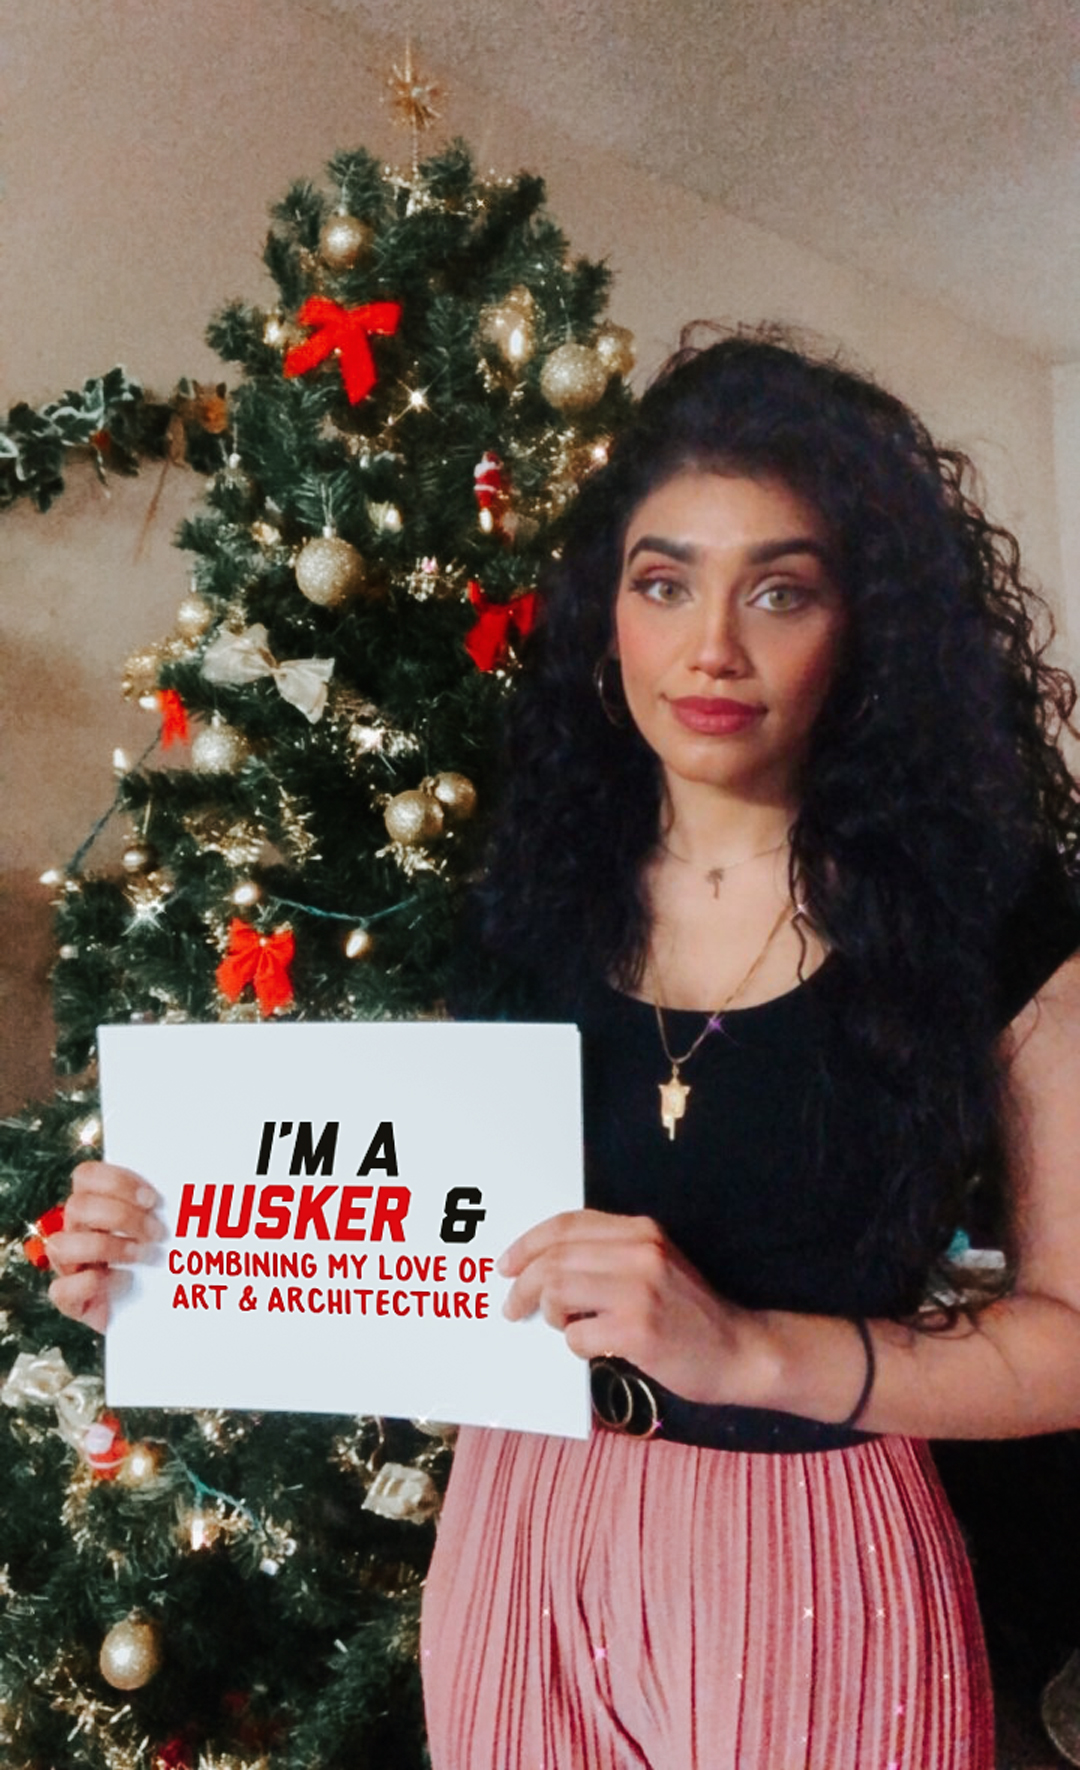 Samah holding a sign that says "I'm a Husker and combining my love of art and architecture."